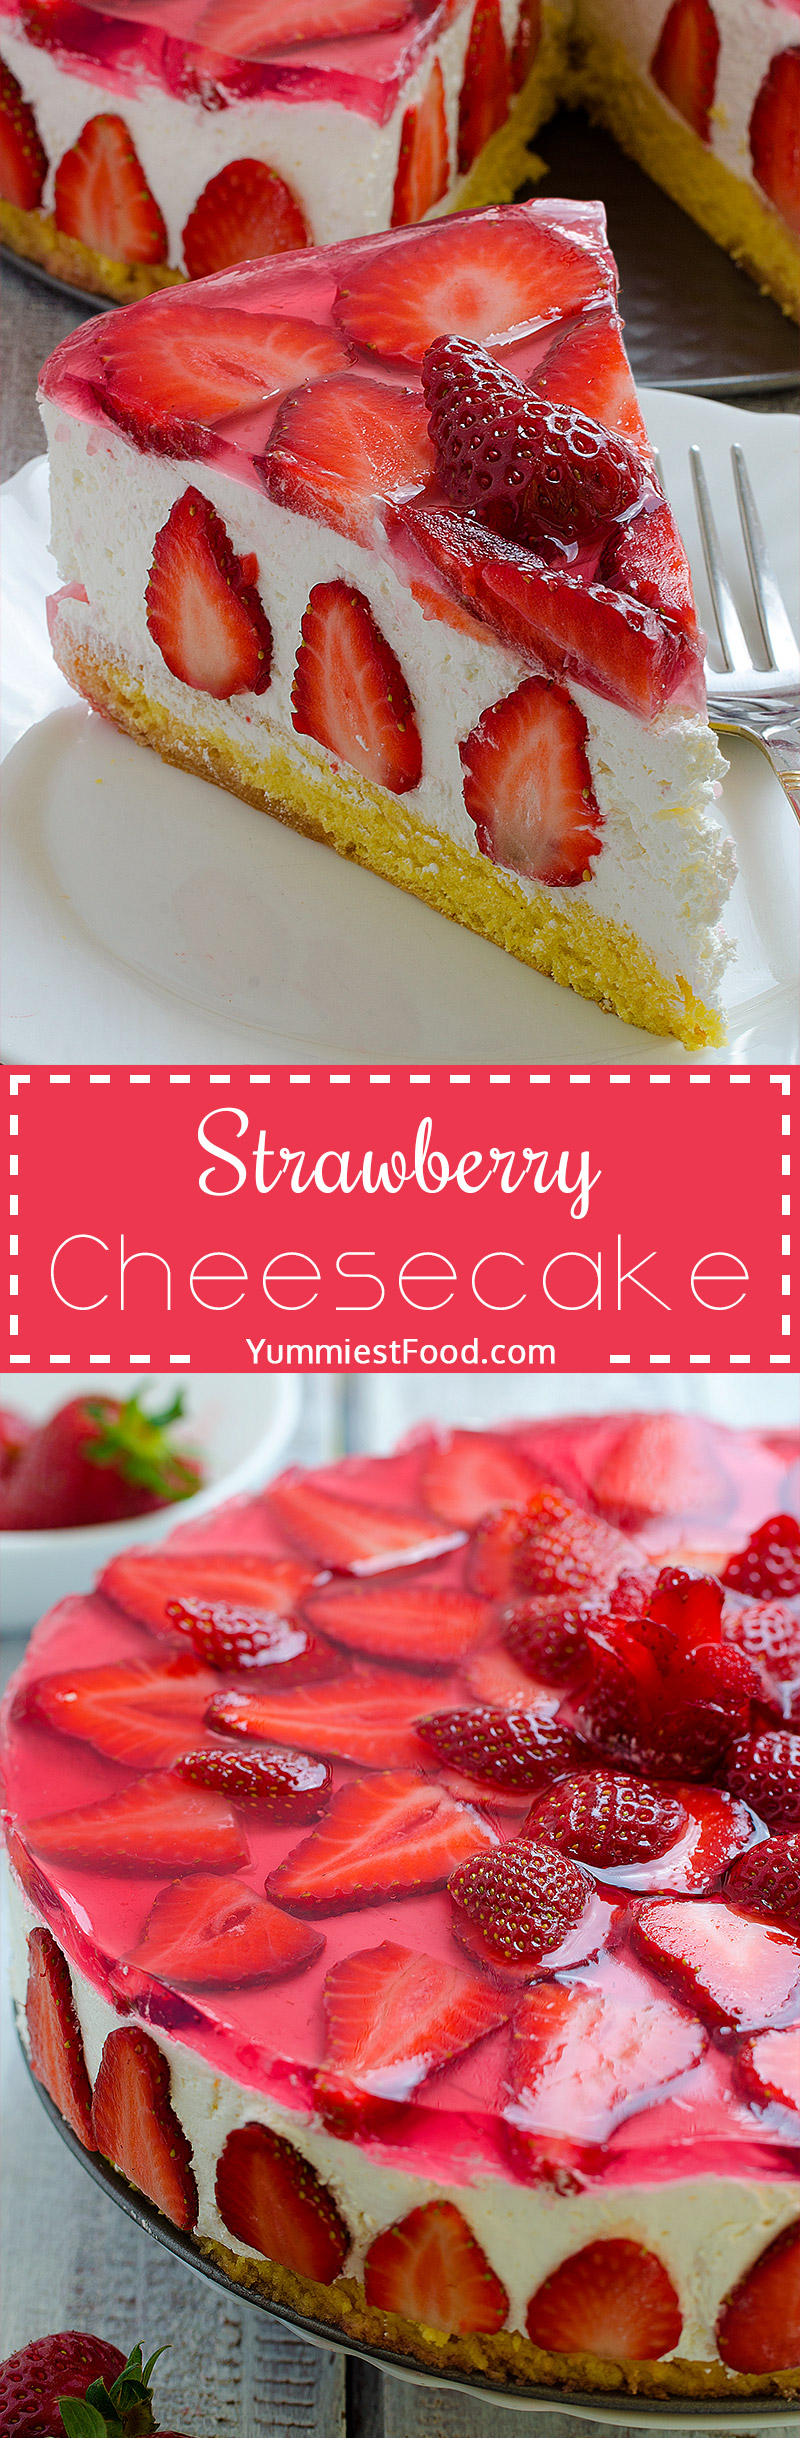 Strawberry Cheesecake - This cake with cheese and strawberry combination is very tasty, delicious, quick and very refreshing.